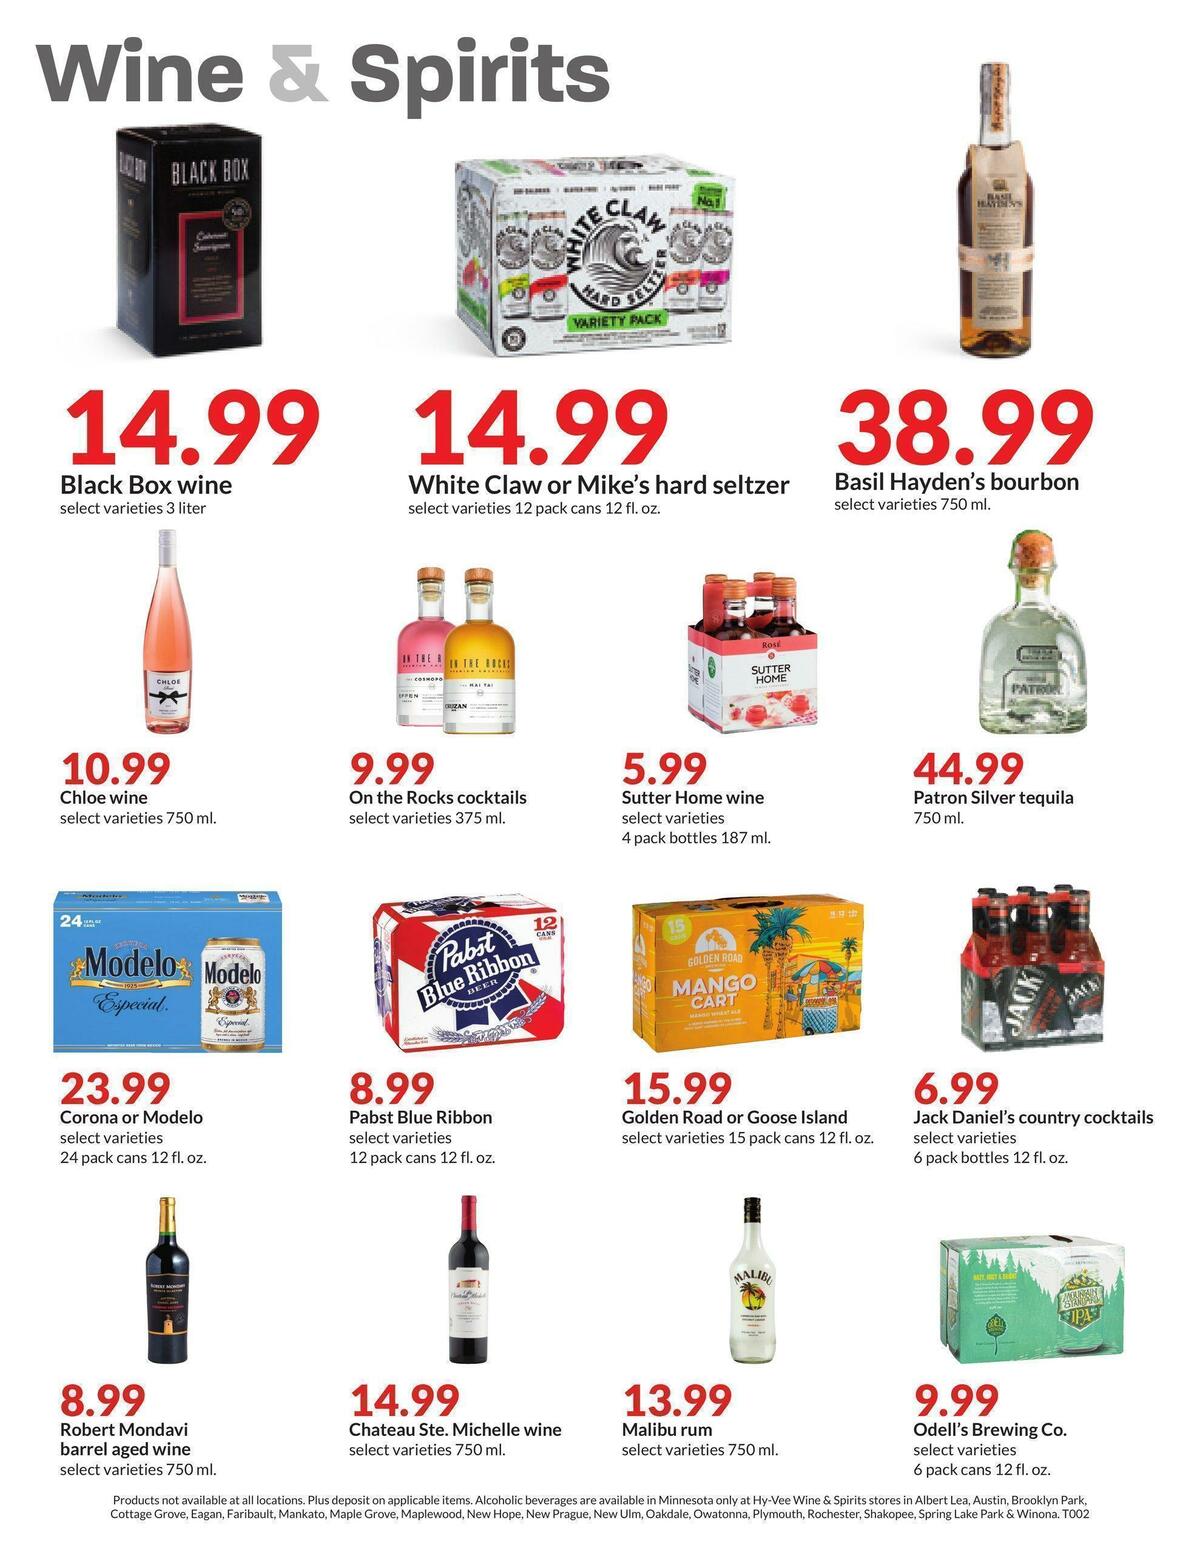 Hy-Vee Weekly Ad from December 4